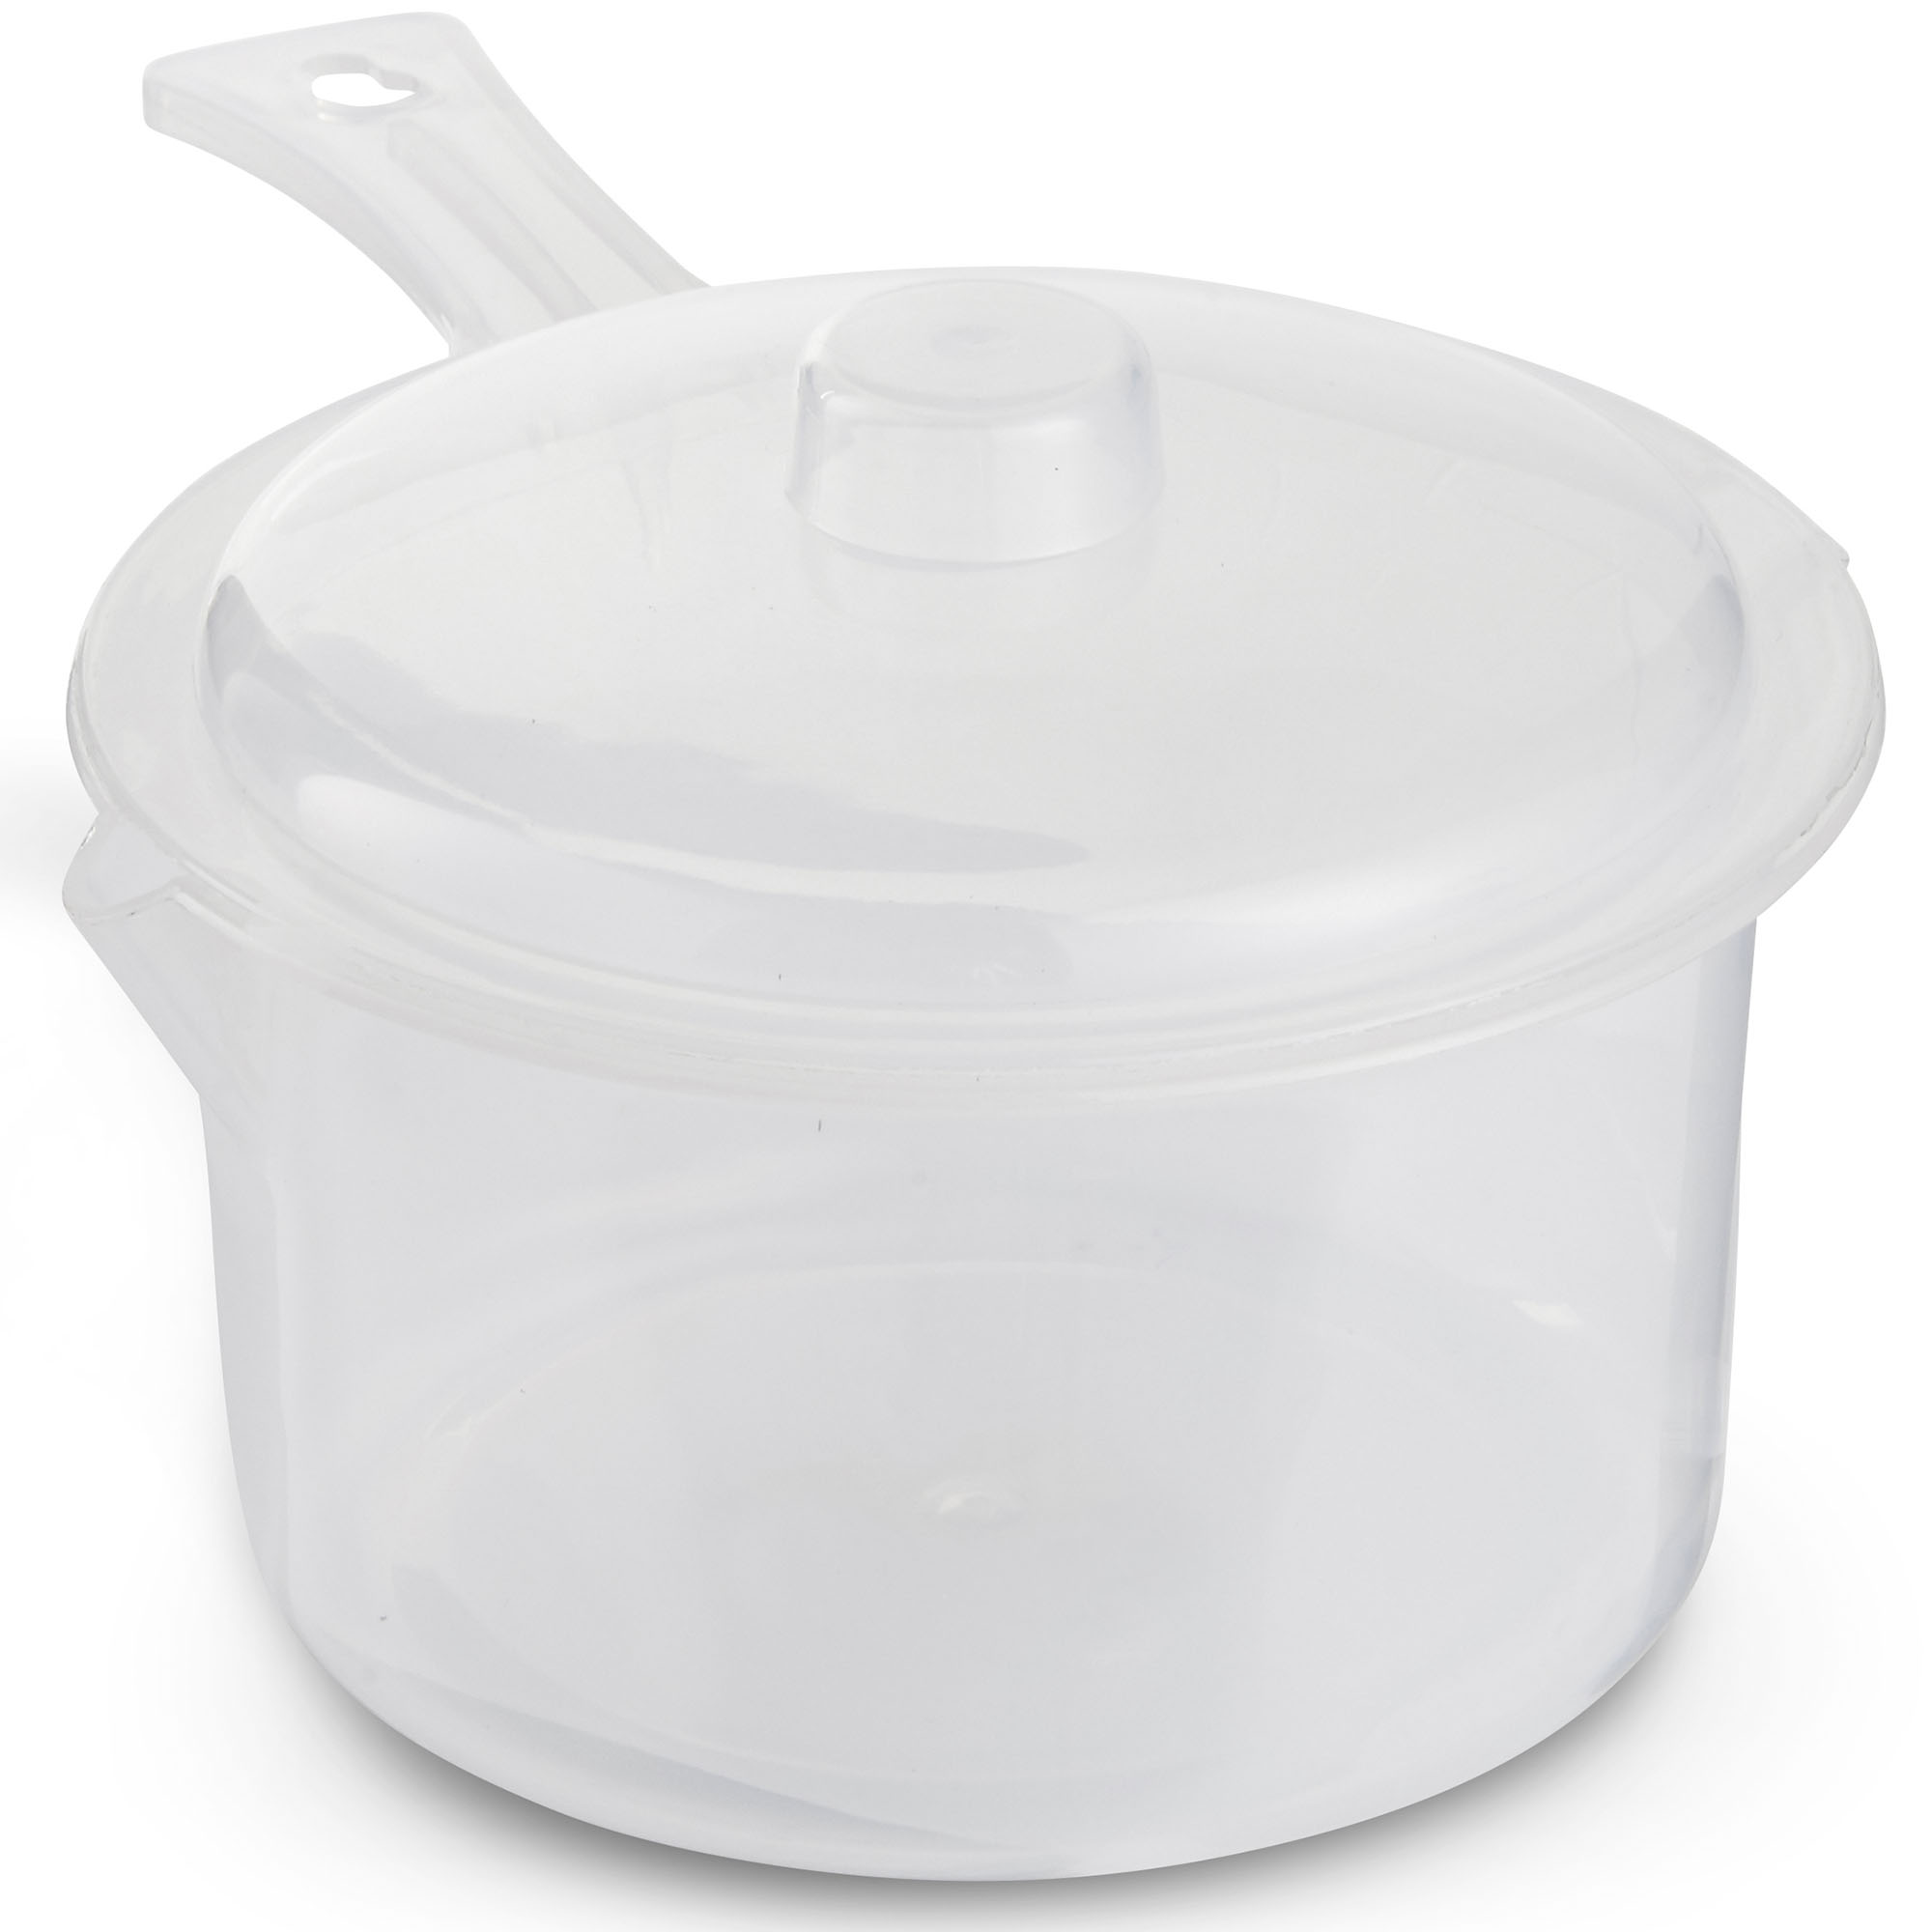 VonShef 600ml Plastic Microwave Cooking Pan Steamer Container Dish